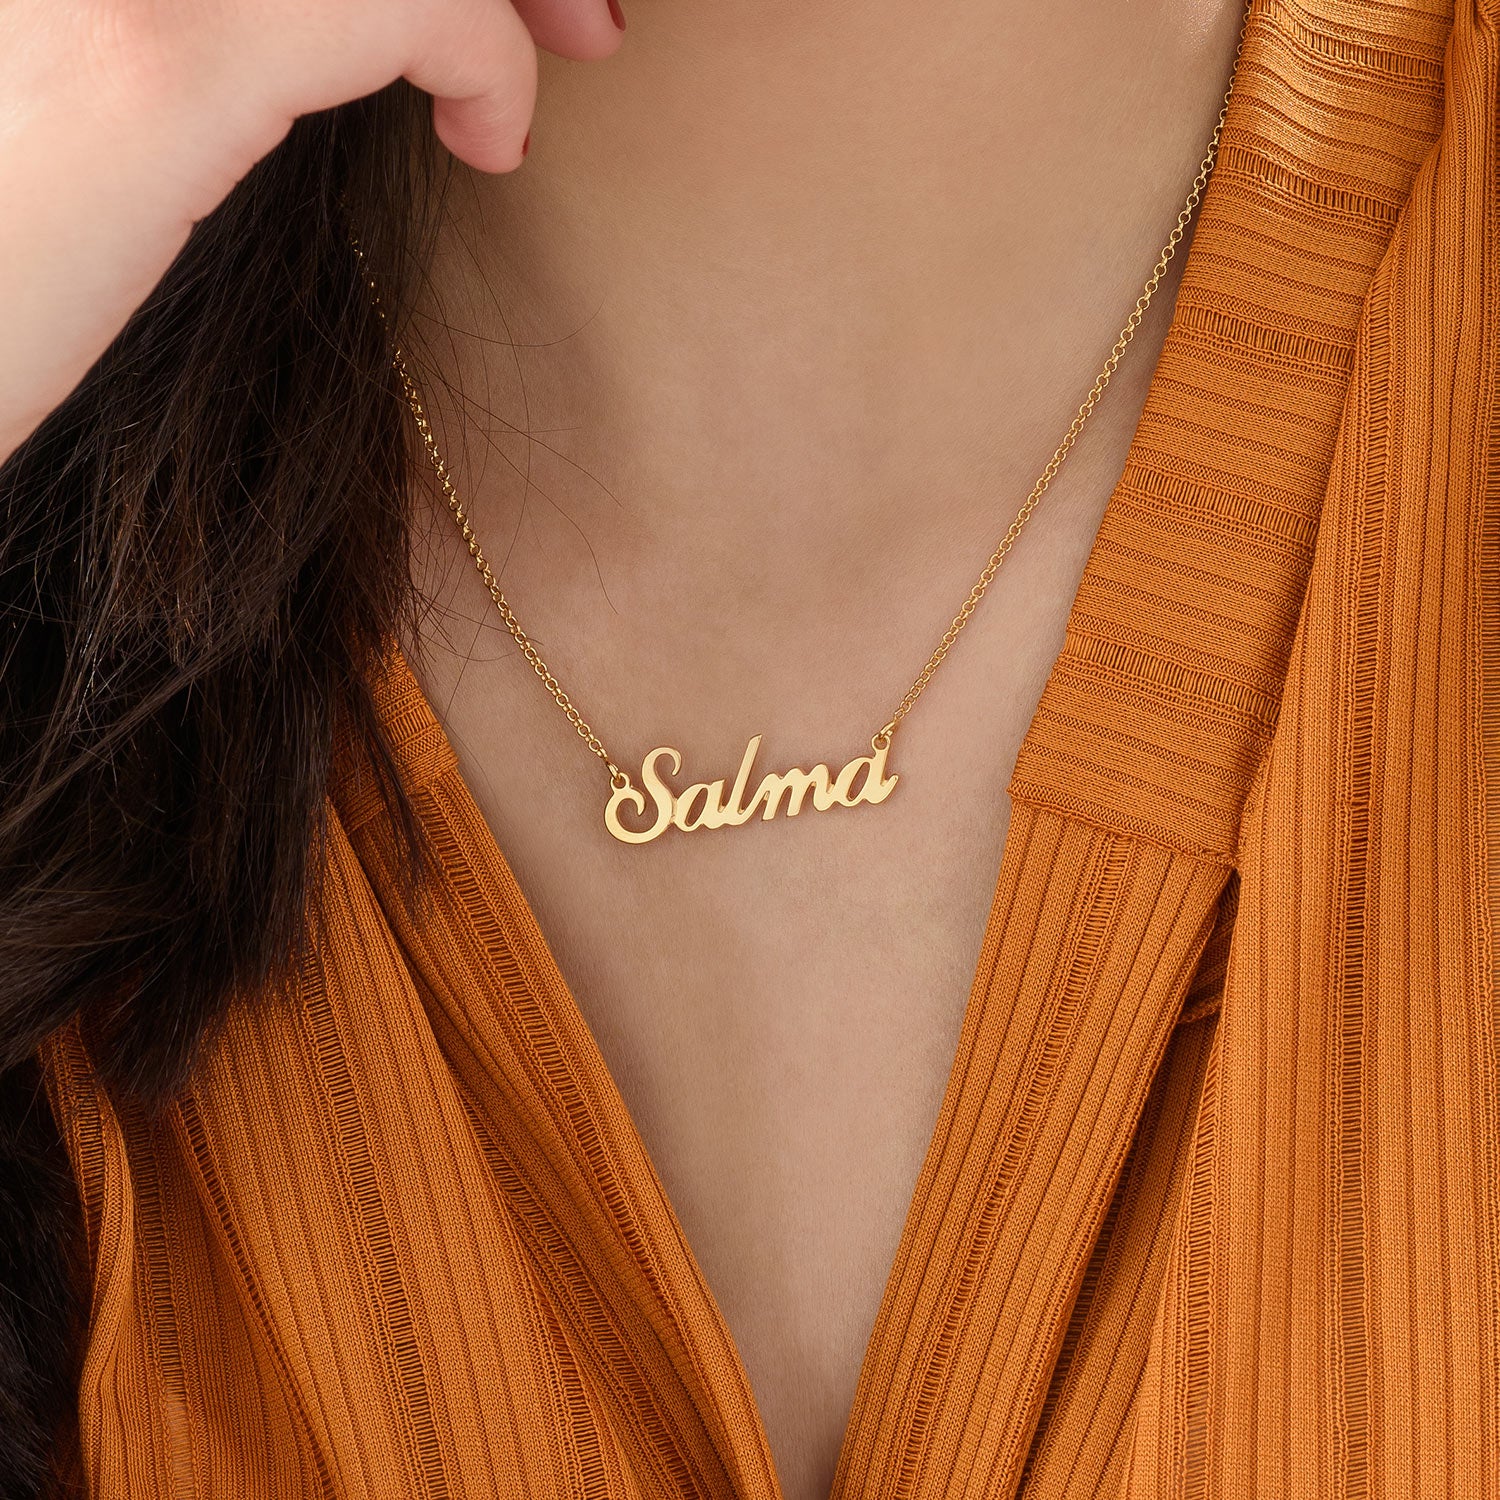 Classic necklace with custom name in 18k gold plated